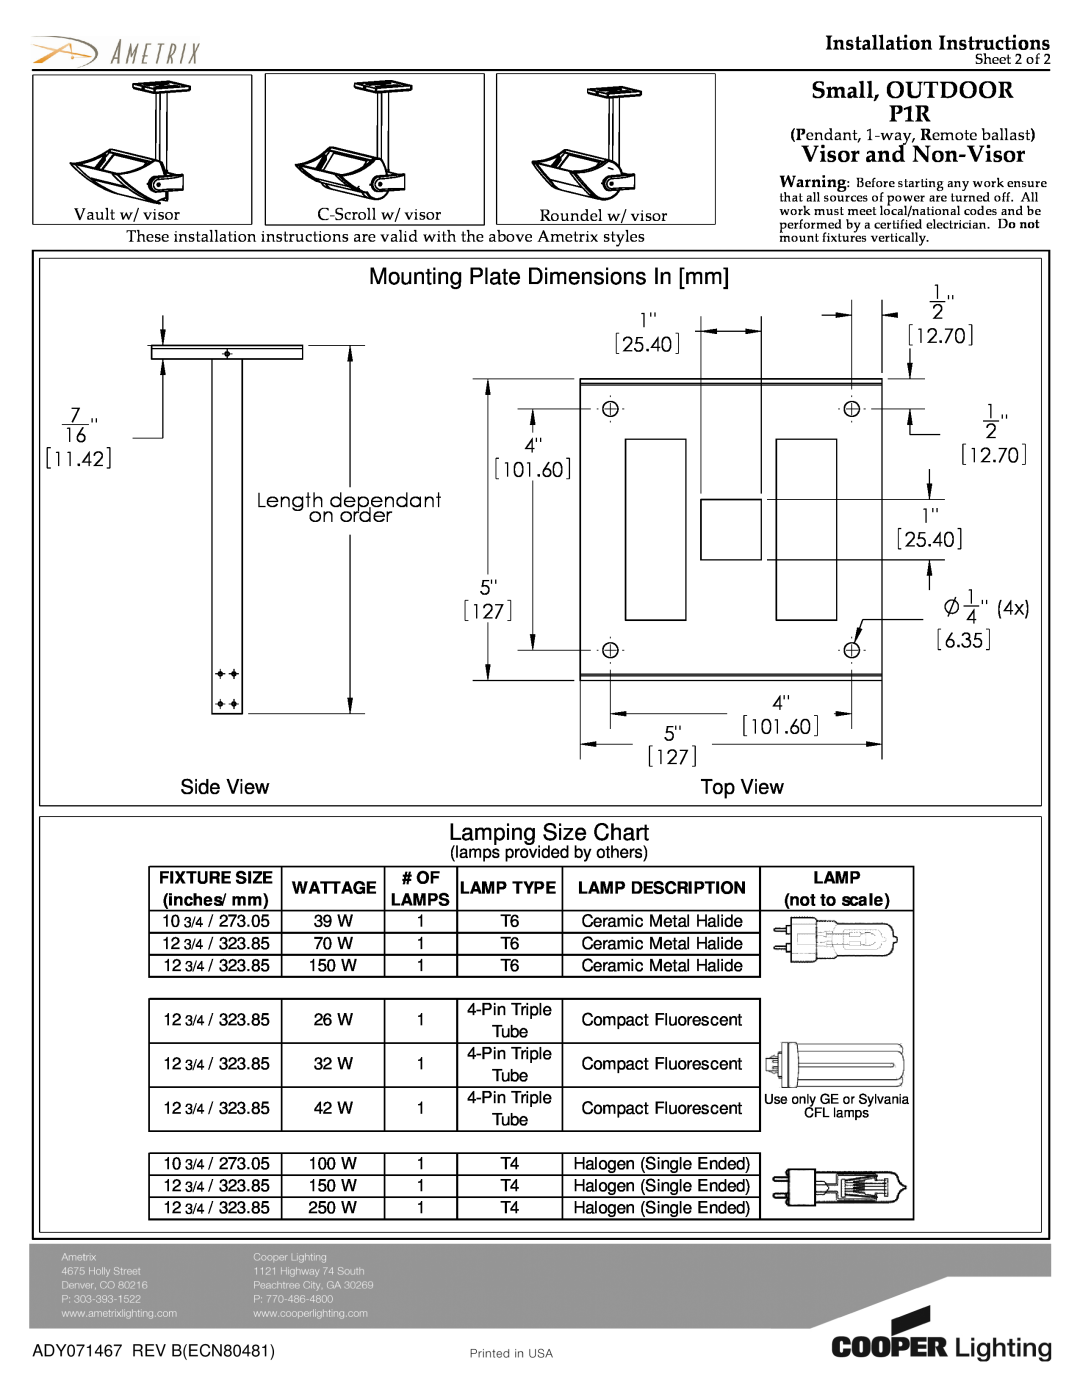 Cooper Lighting Small, OUTDOOR P1R, Visor and Non-Visor, Mounting Plate Dimensions In mm, Lamping Size Chart 